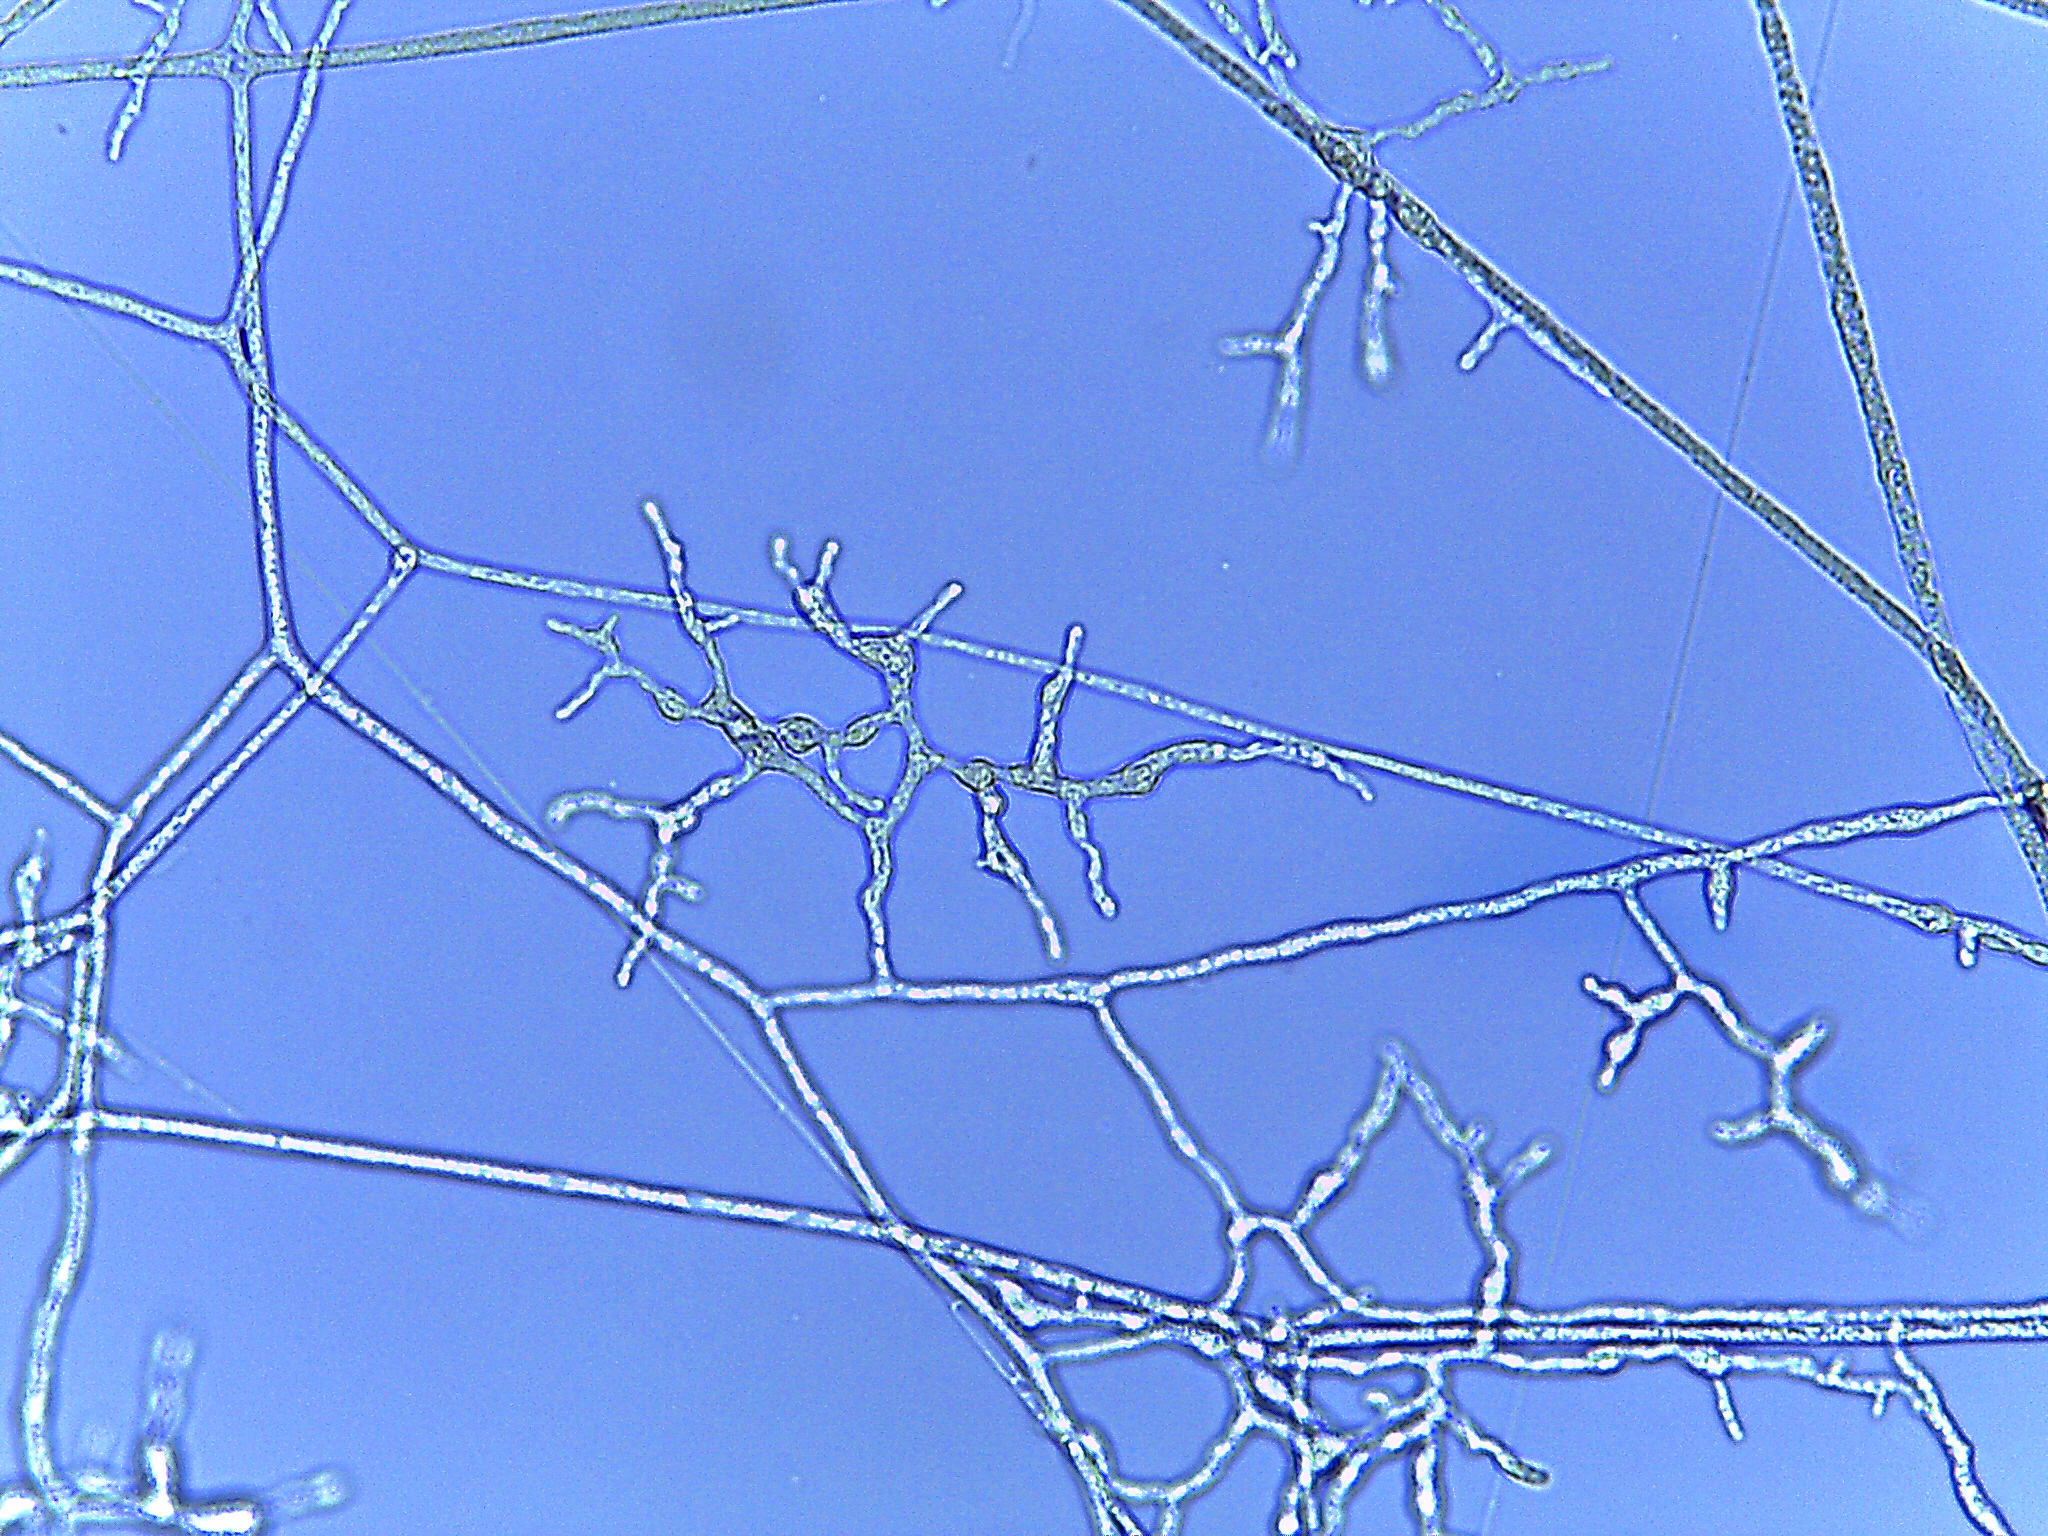 Figure 2. AD185 and related lineages of Mortierellaceae produce terminal dendritic structures on axillary branches of hyphae. The structures mature into branched, spherical chlamydospores. Image courtesy of Julian Liber.